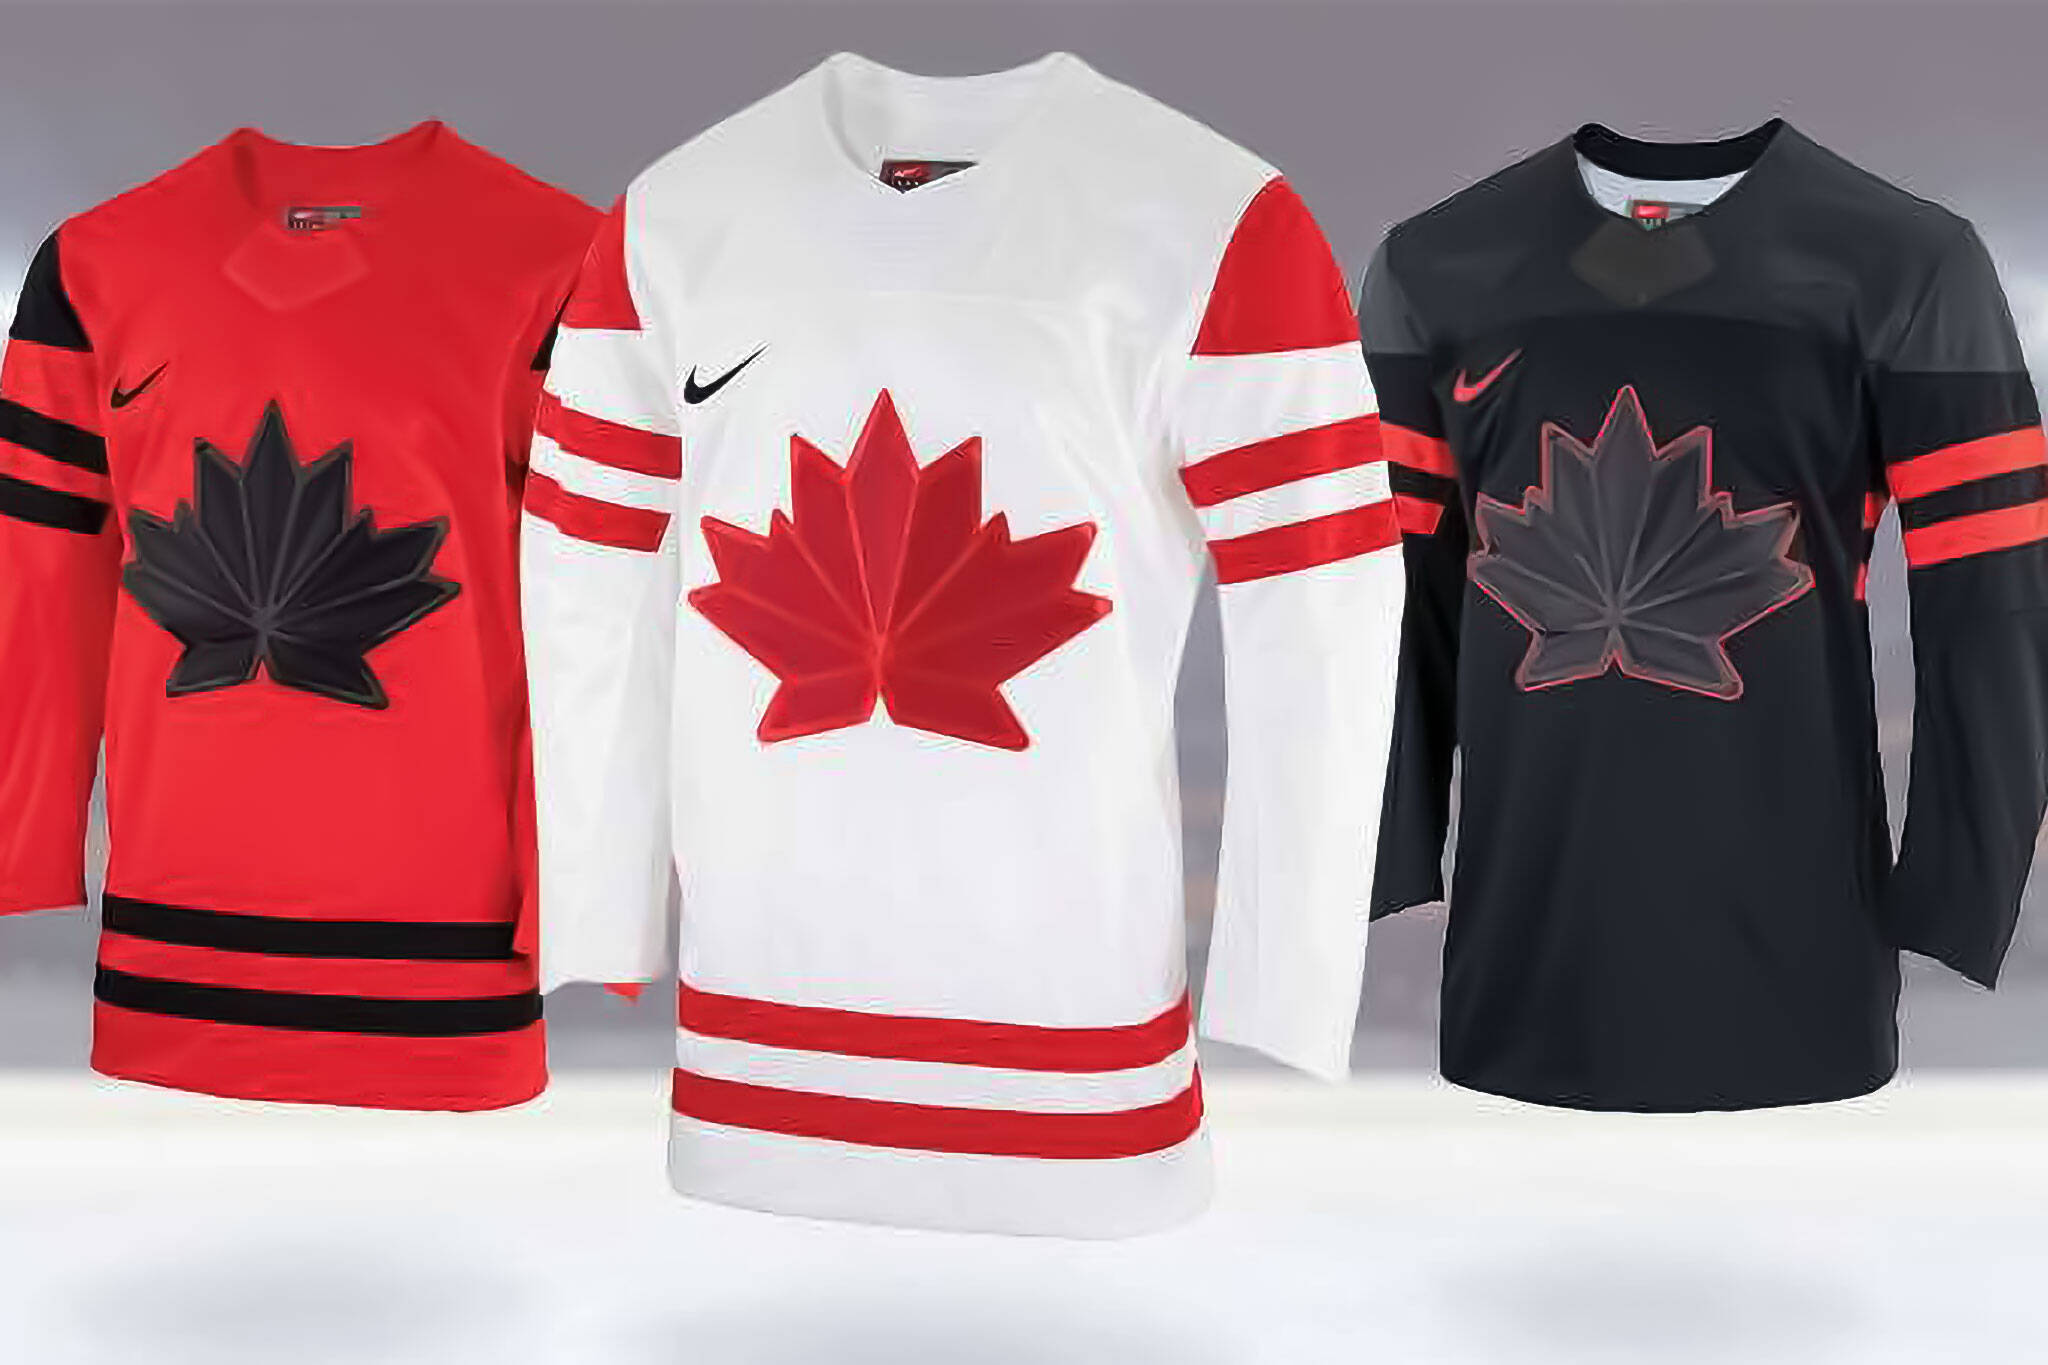 Hockey fans have strong opinions about Canada's new Olympic jerseys